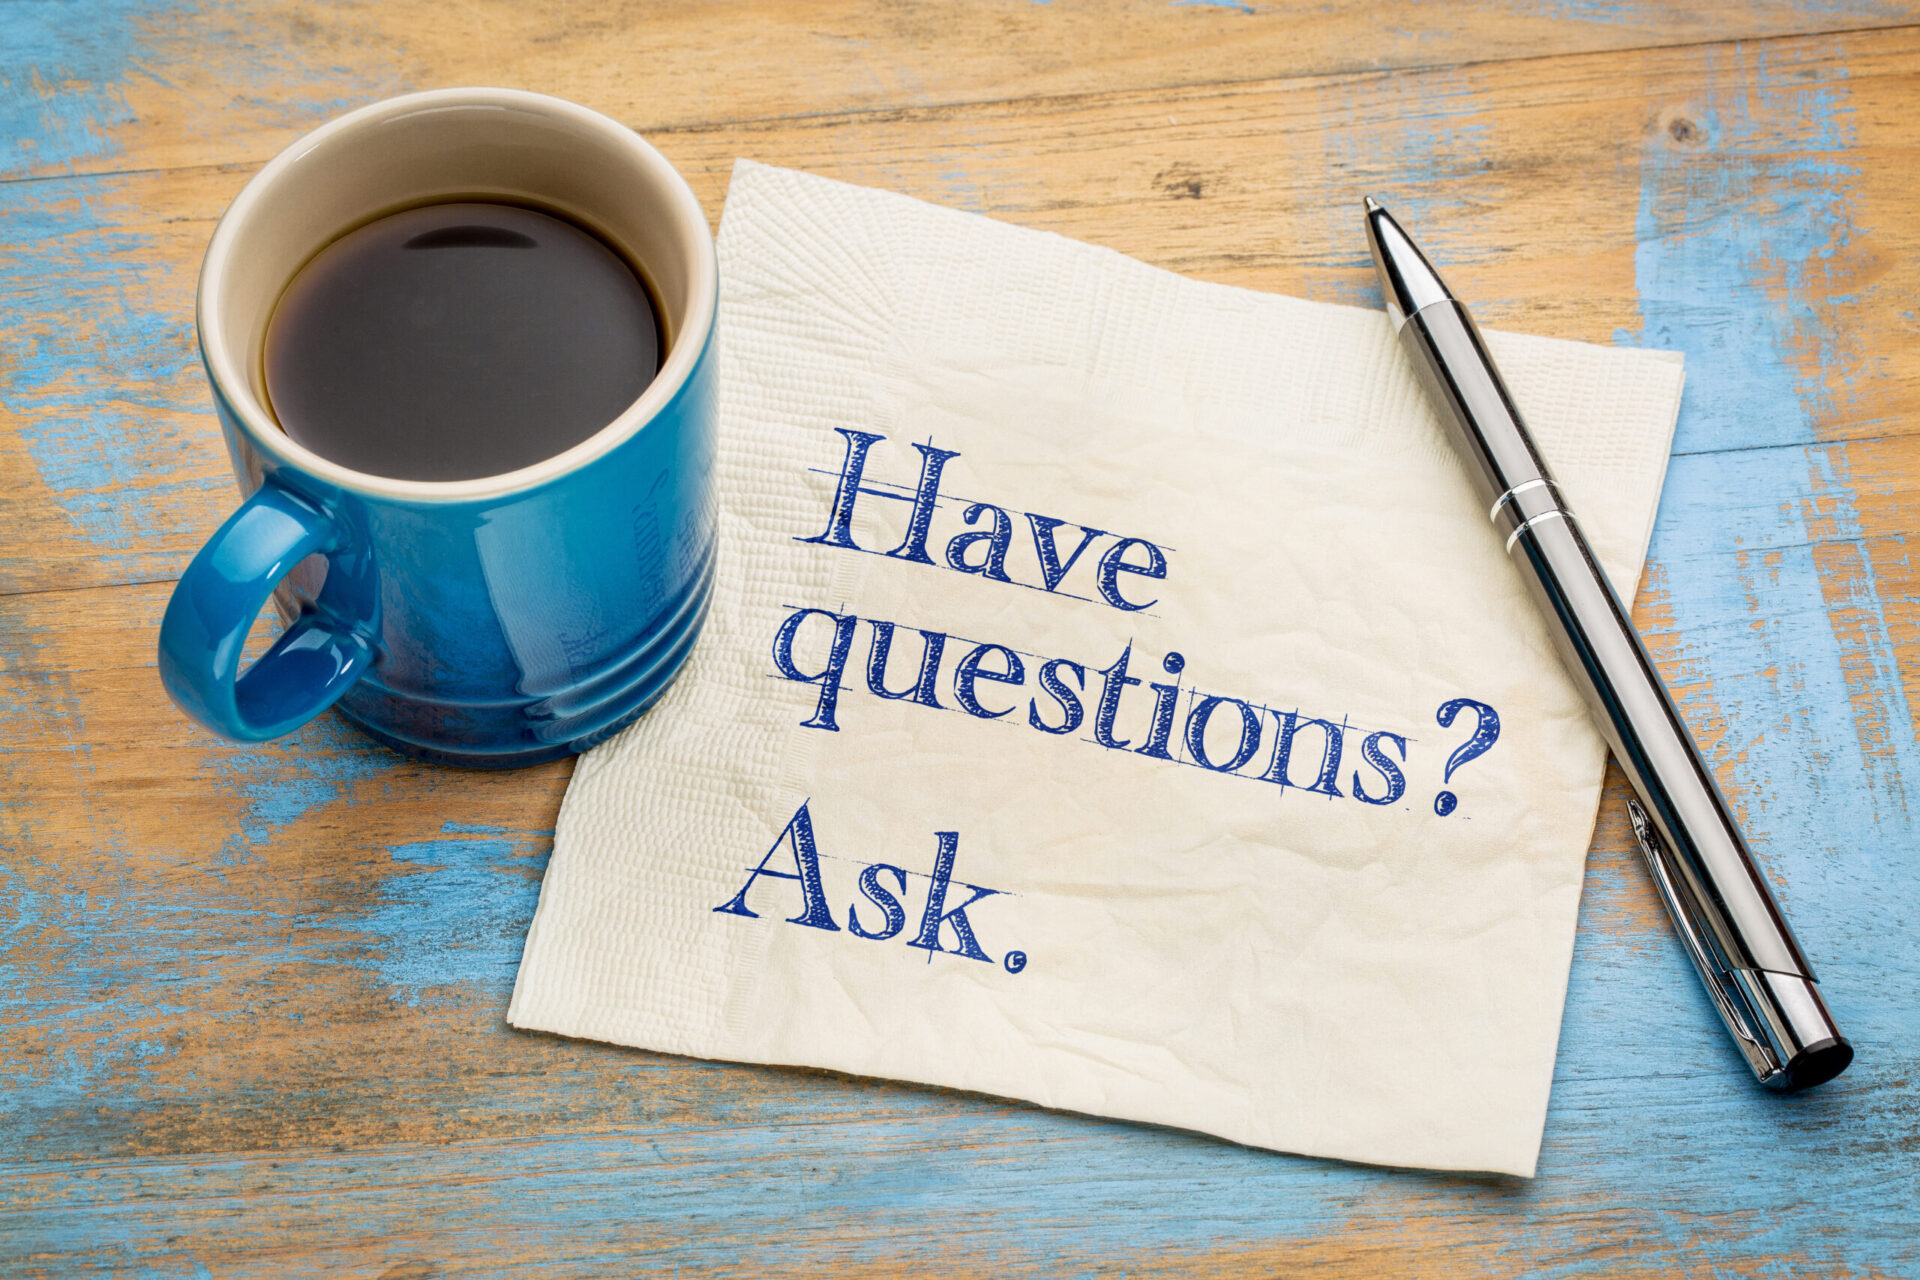 Photo of ' Have questions? Ask.' written on a napkin next to a cup of coffee